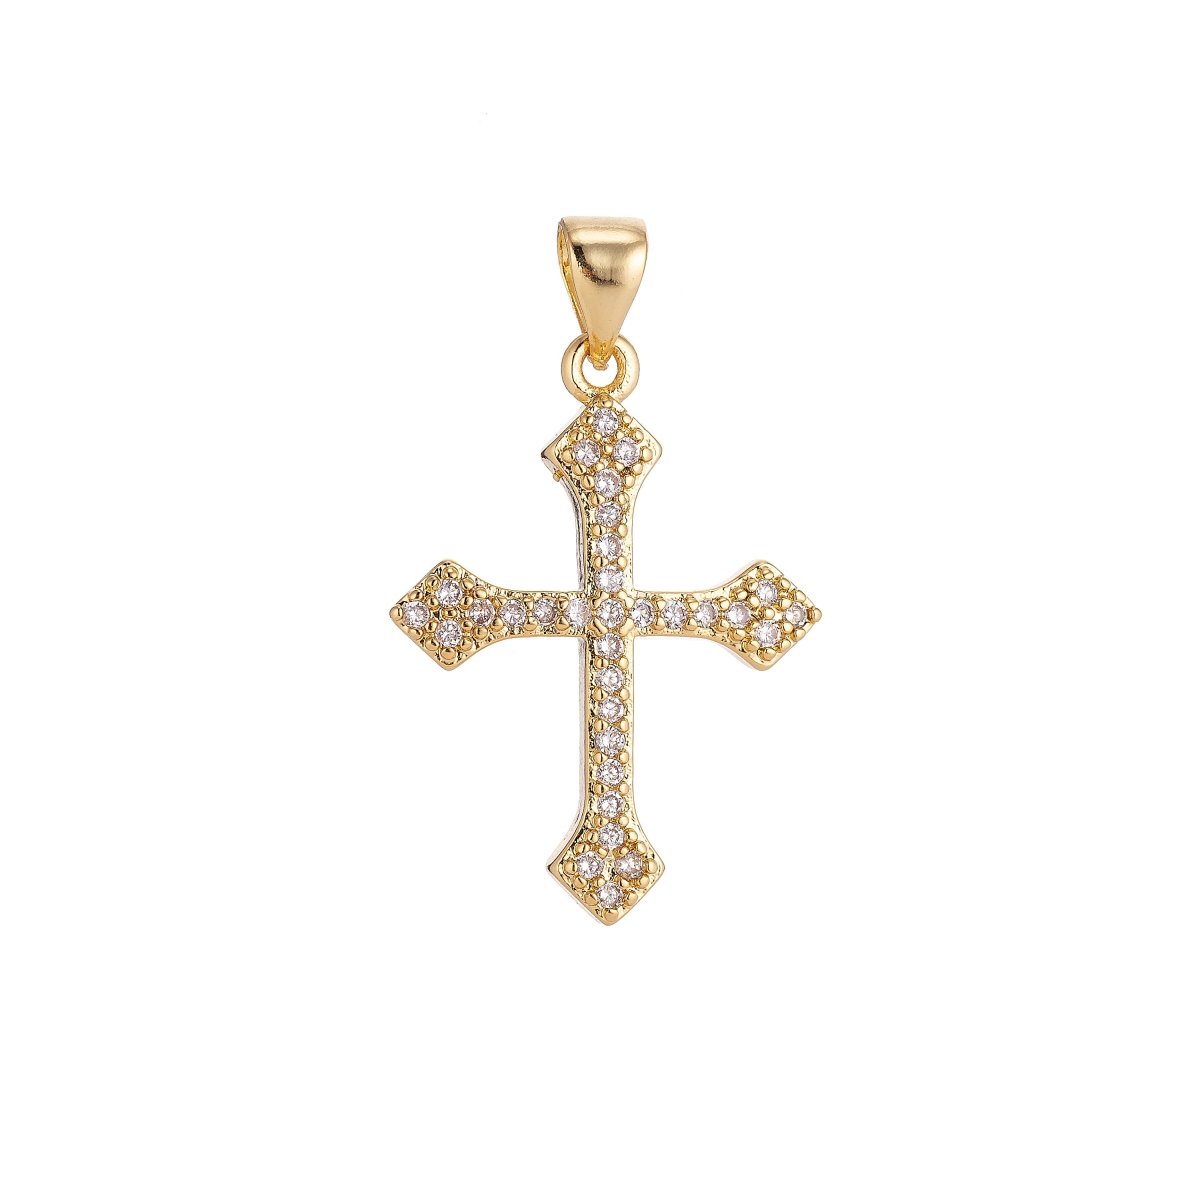 14K Gold Filled Old English Cross Pendant Charm with Cubic Zircon (CZ) Rhinestone for Jewelry Making Supplies Christian Catholic Religion H-188 - DLUXCA